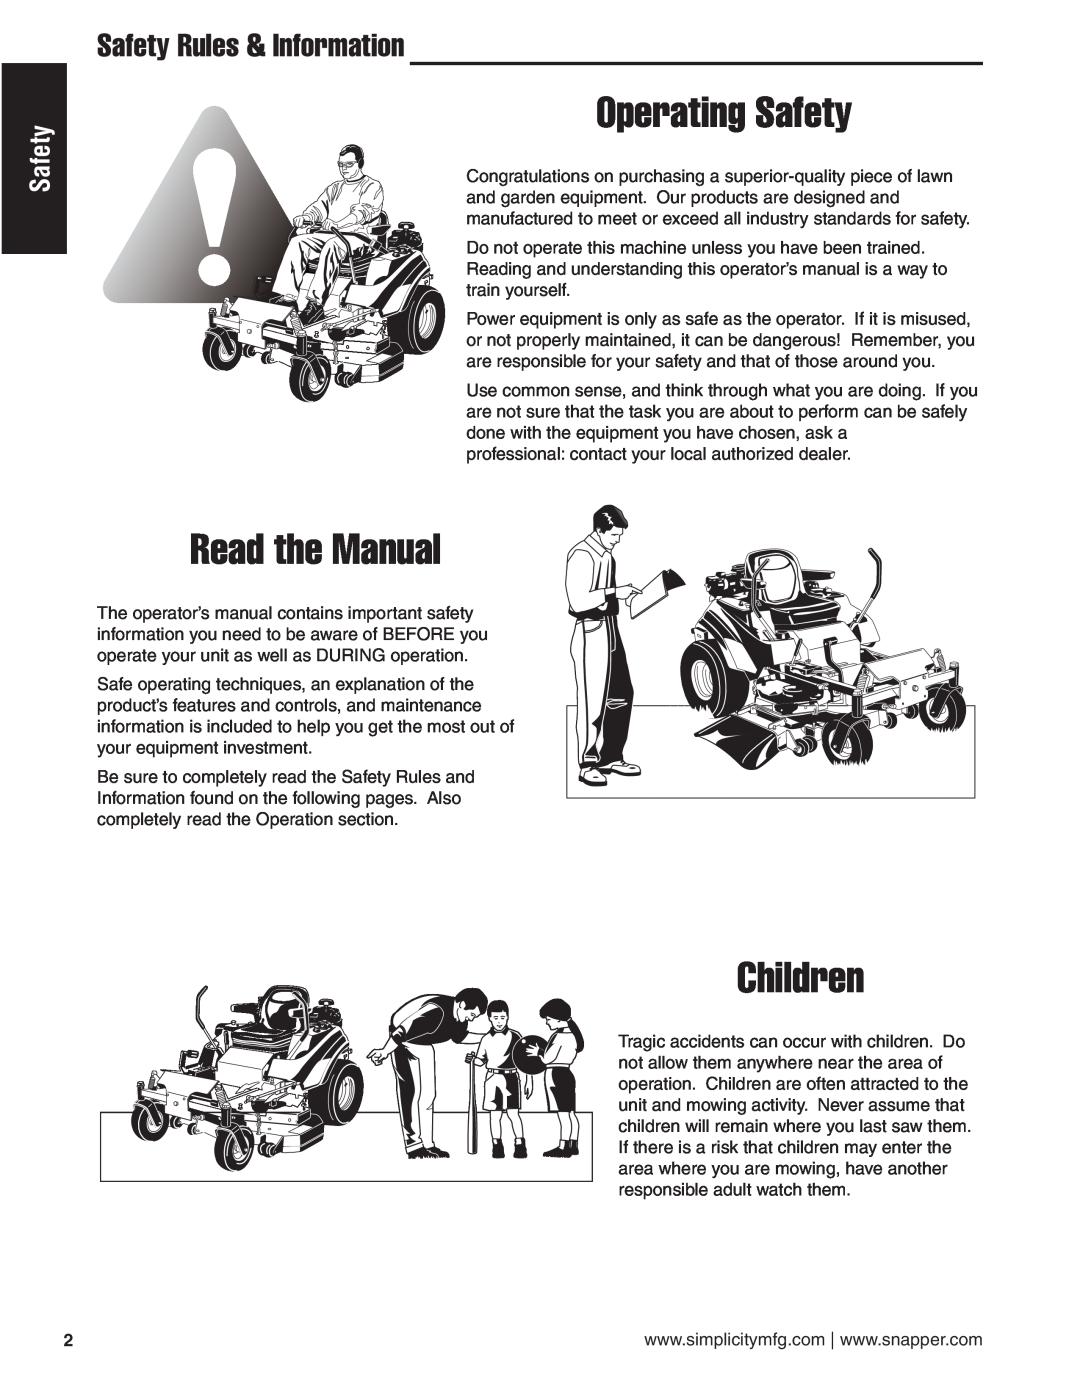 Simplicity 24HP manual Operating Safety, Read the Manual, Children, Safety Rules & Information 